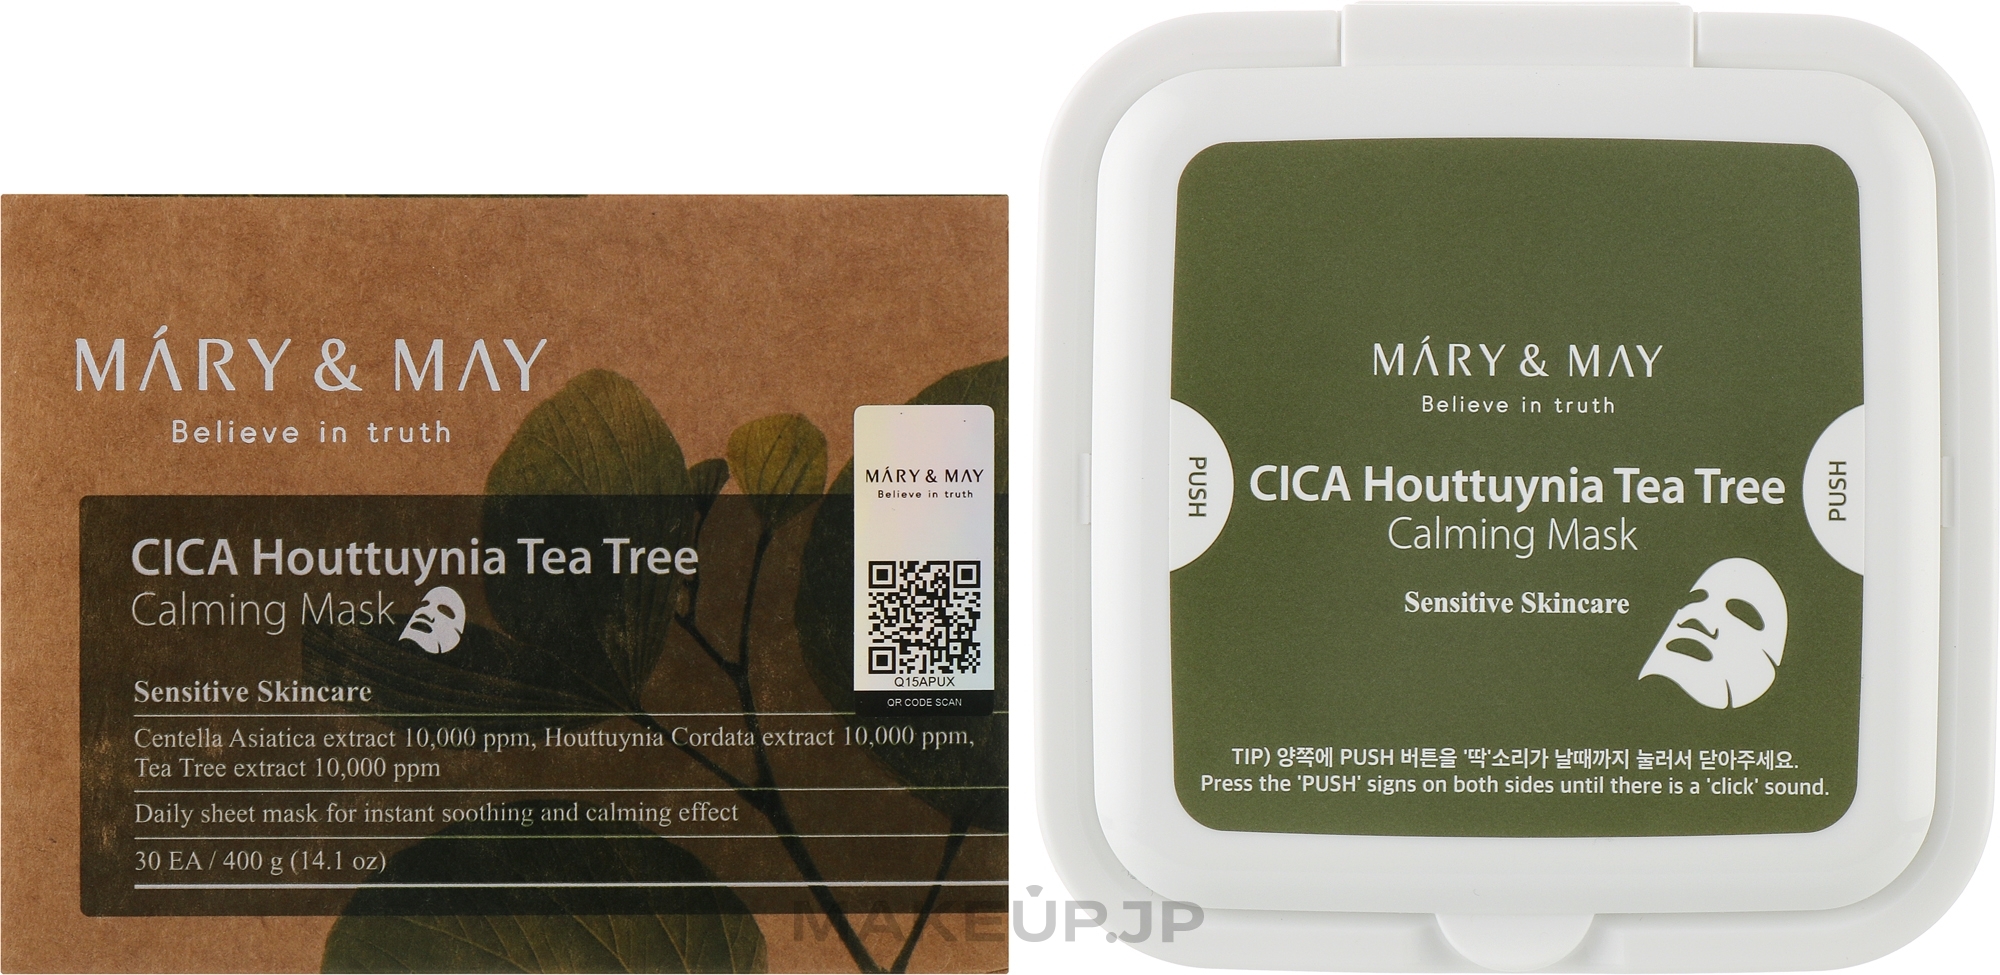 Soothing Sheet Mask - Mary & May CICA Houttuynia Tea Tree Calming Mask — photo 30 szt.